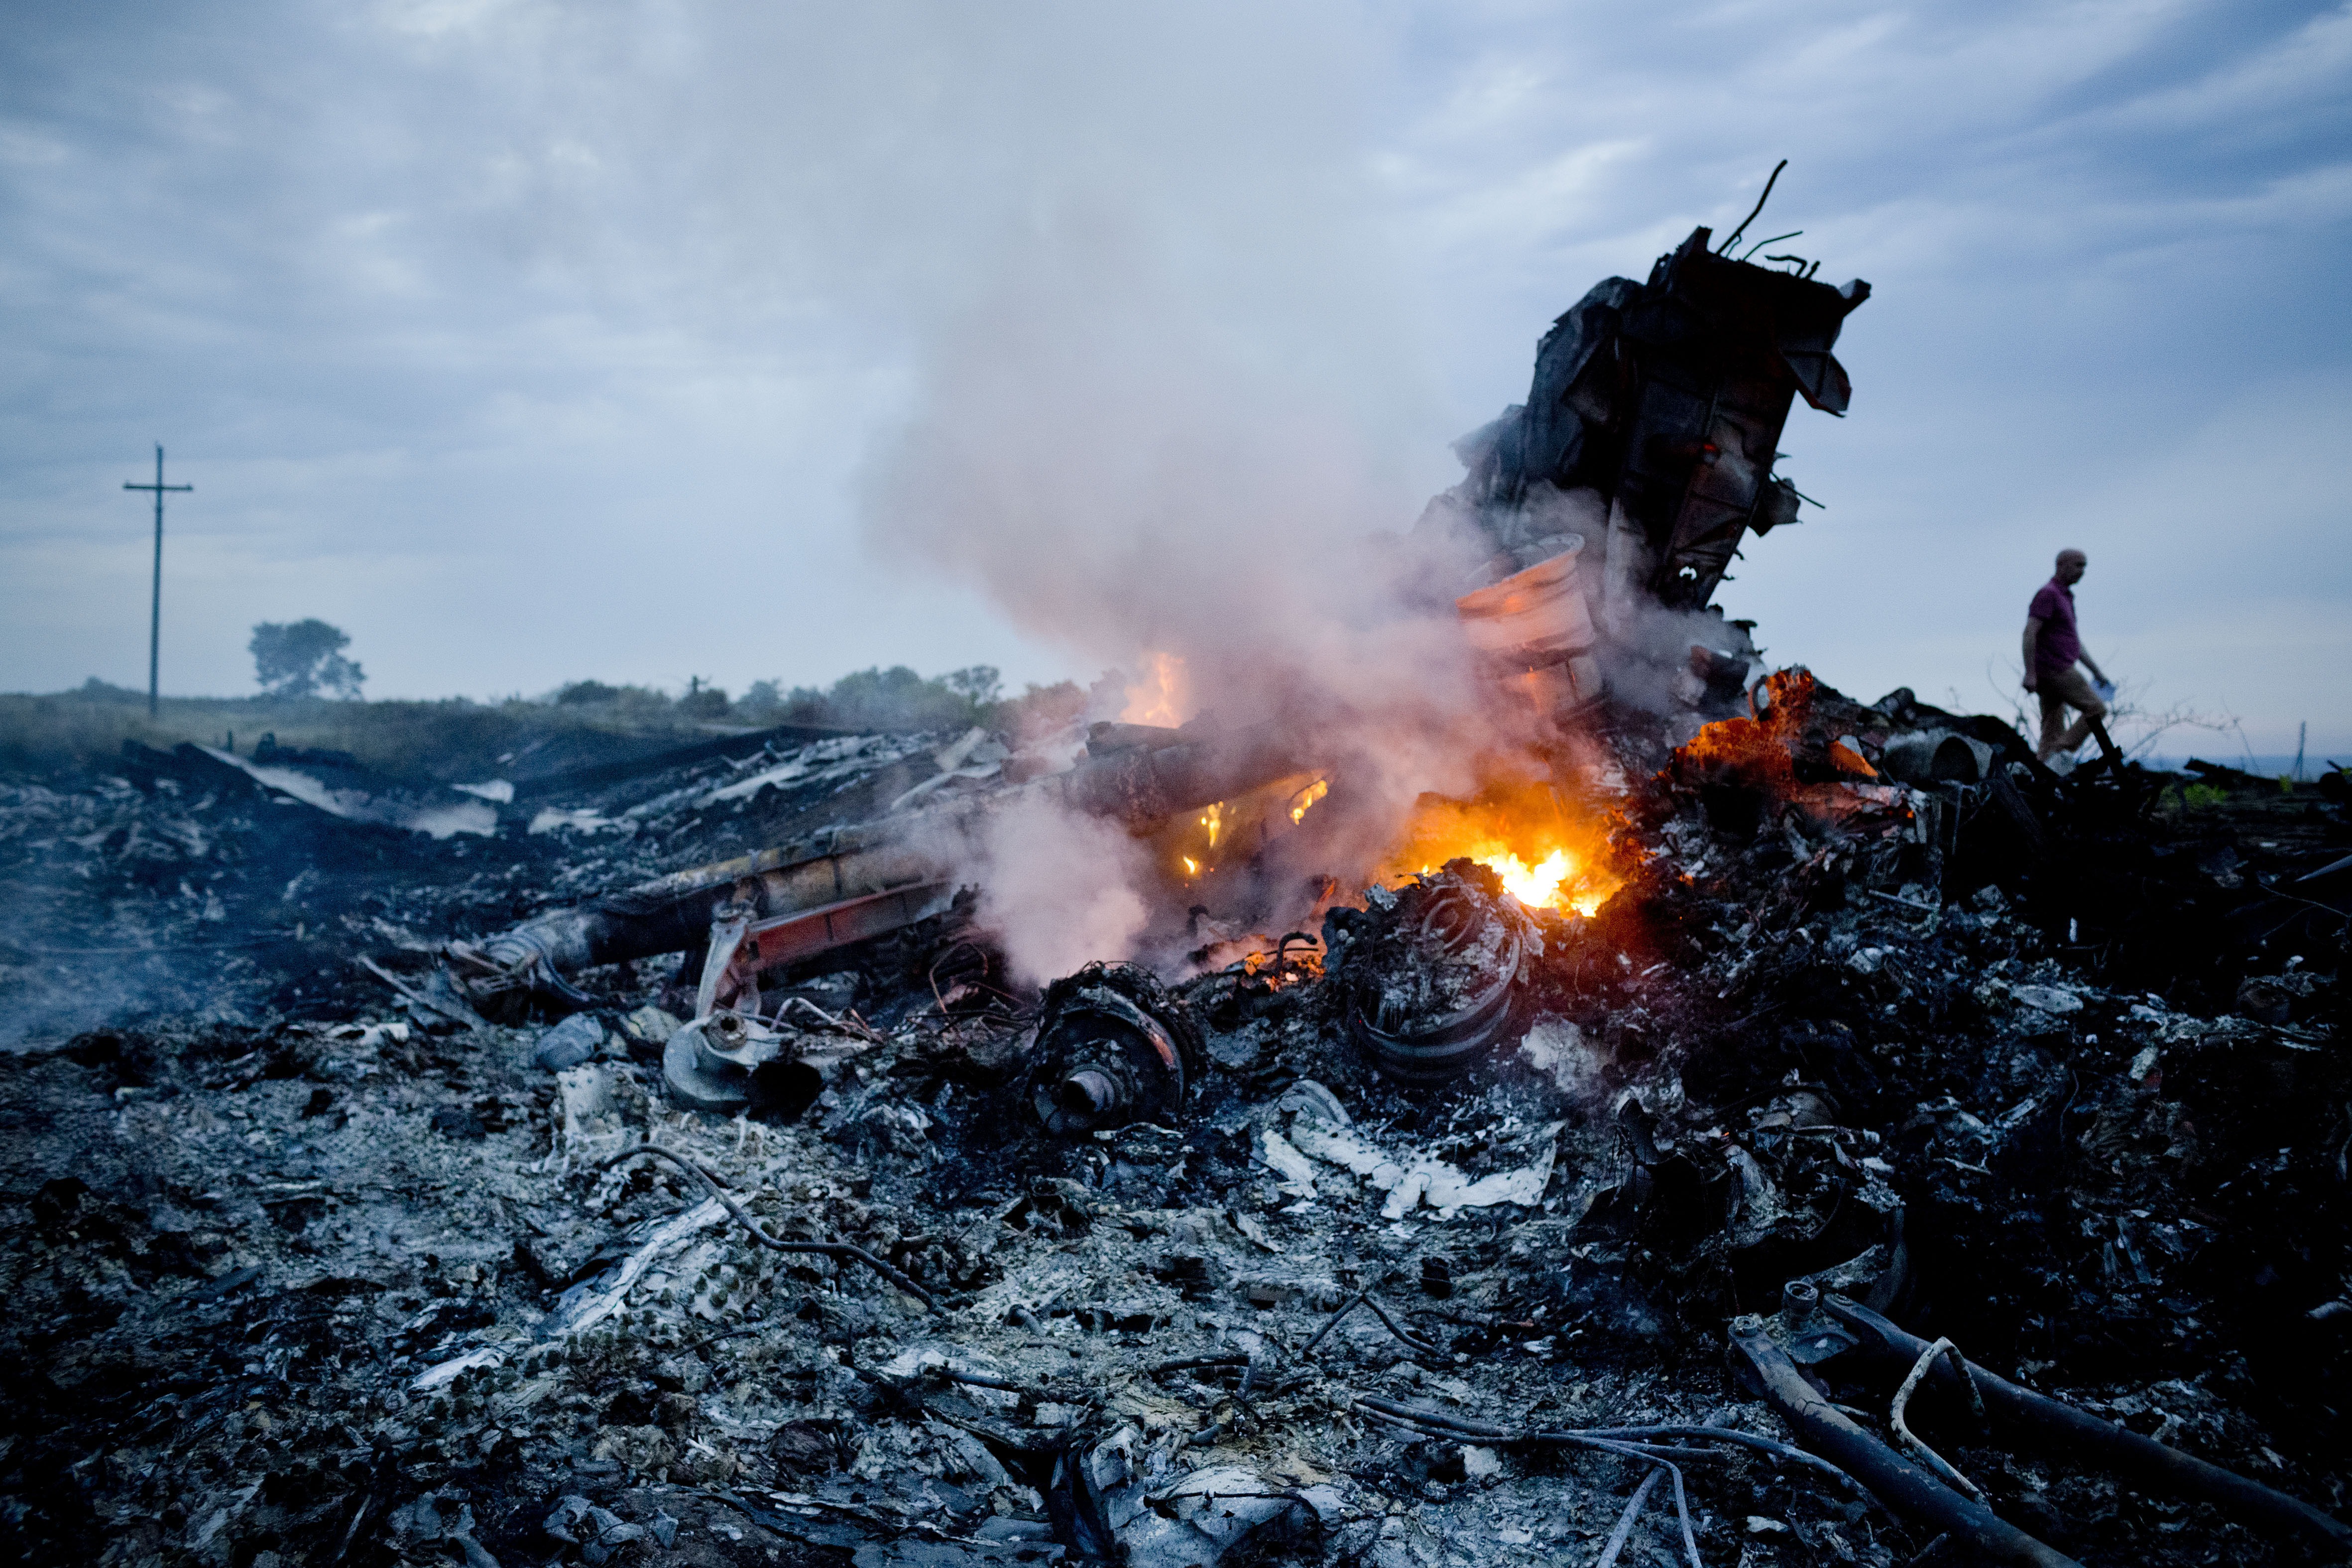 Debris from Malaysia Airlines Flight 17 is shown smouldering in a field  July 17, 2014 in Grabovo, Ukraine near the Russian border. (Pierre Crom—Getty Images)